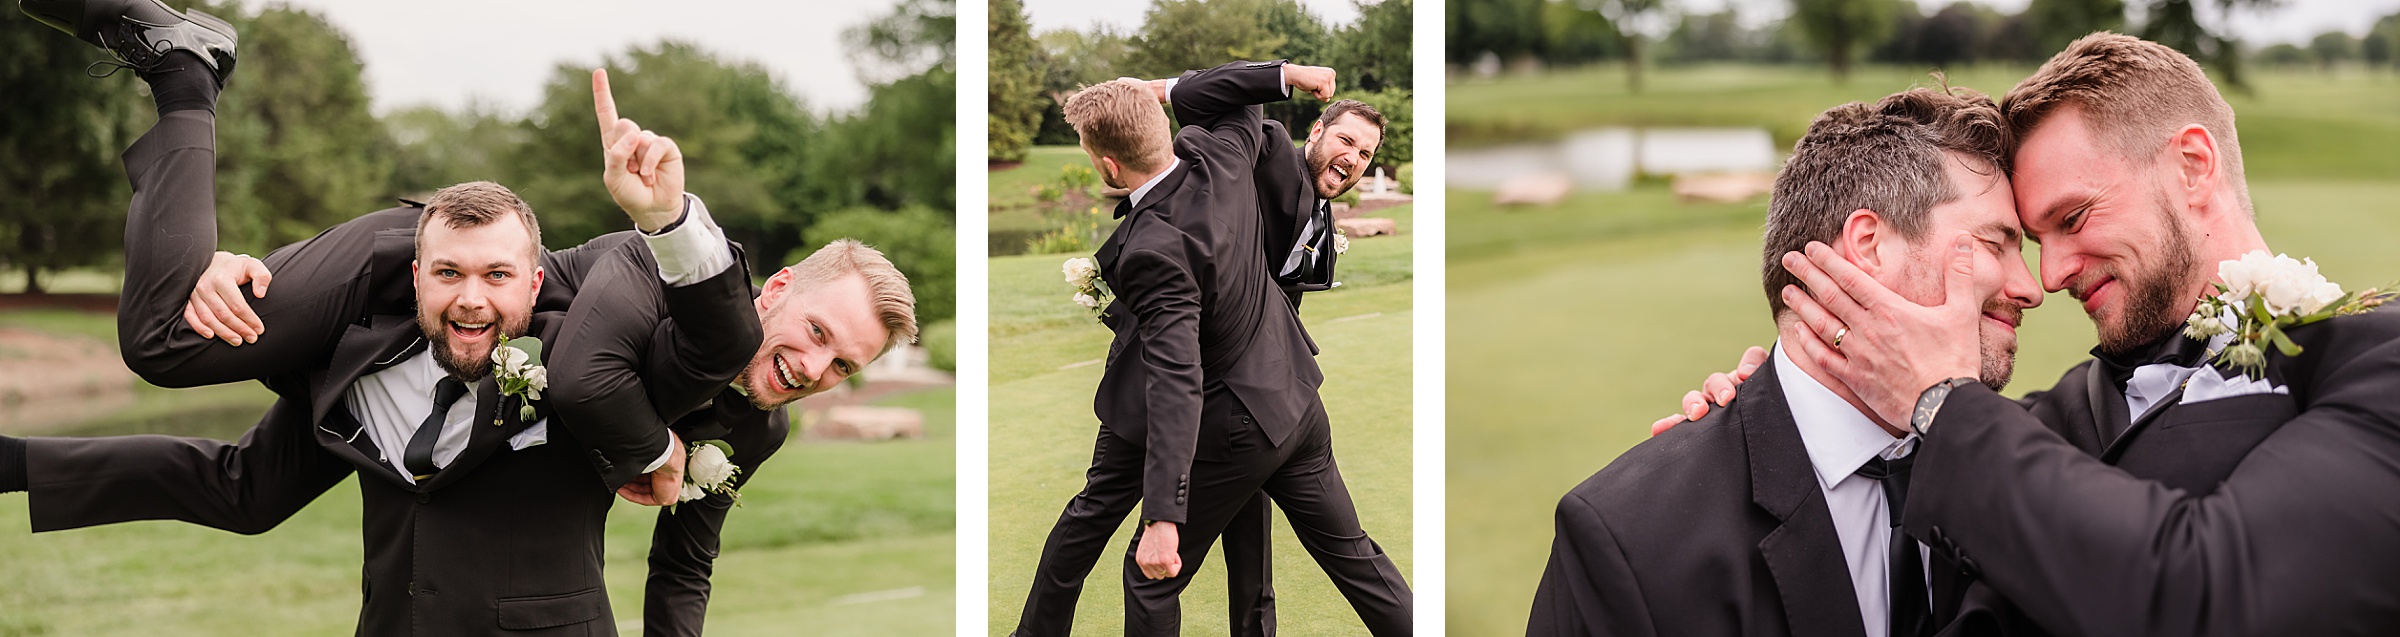 Groom celebrating his wedding with his groomsmen at the Chevy Chase Country Club in Wheeling, Illinois.